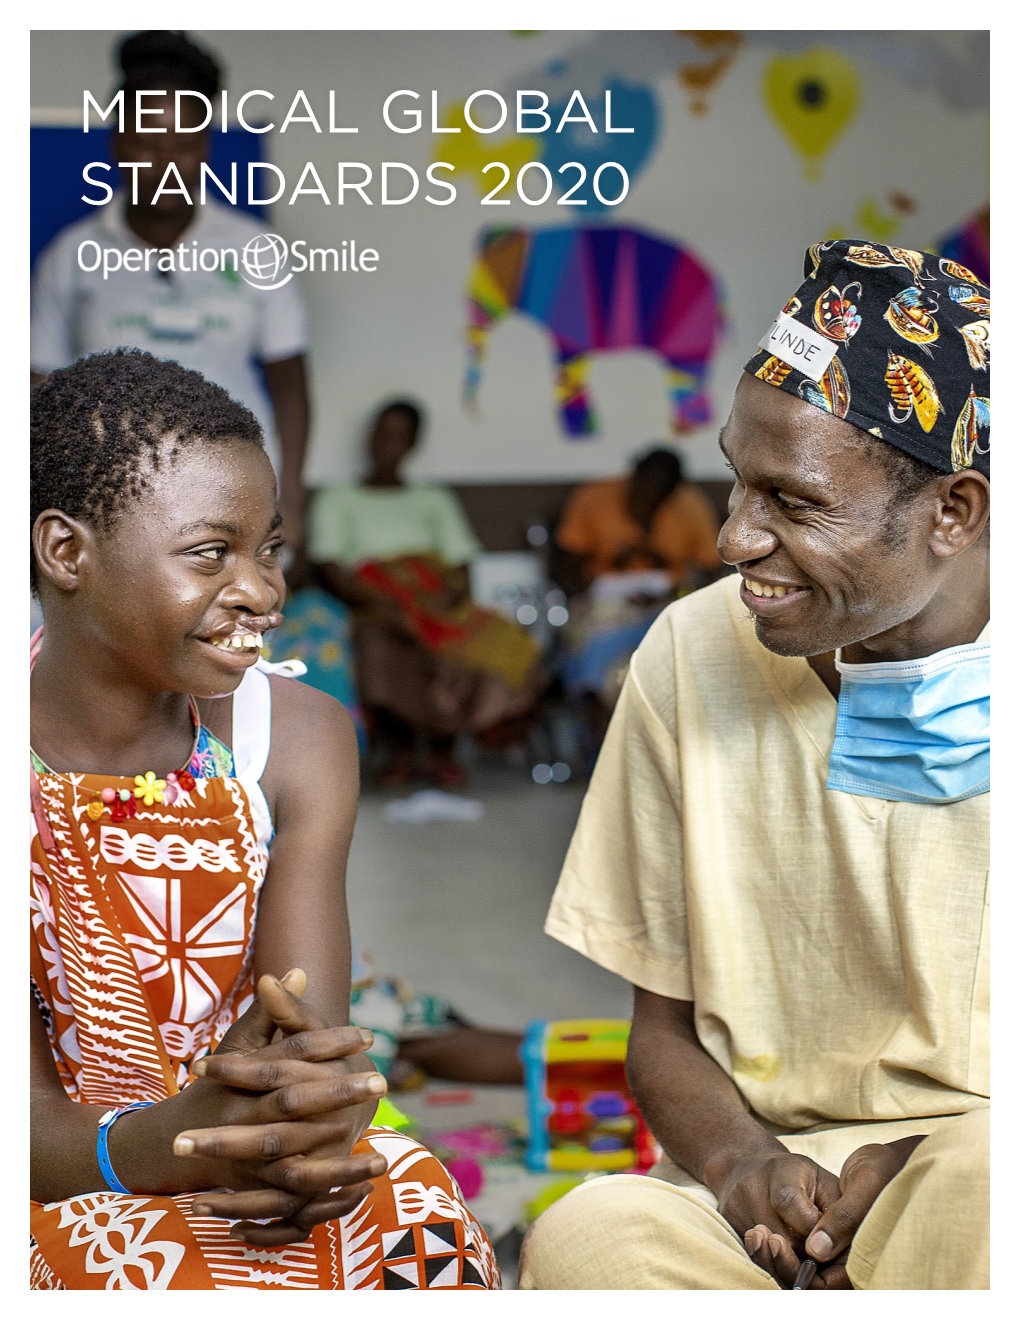 MEDICAL GLOBAL STANDARDS 2020 These Global Standards Represent the Efforts of Our Dedicated Volunteers and Staff